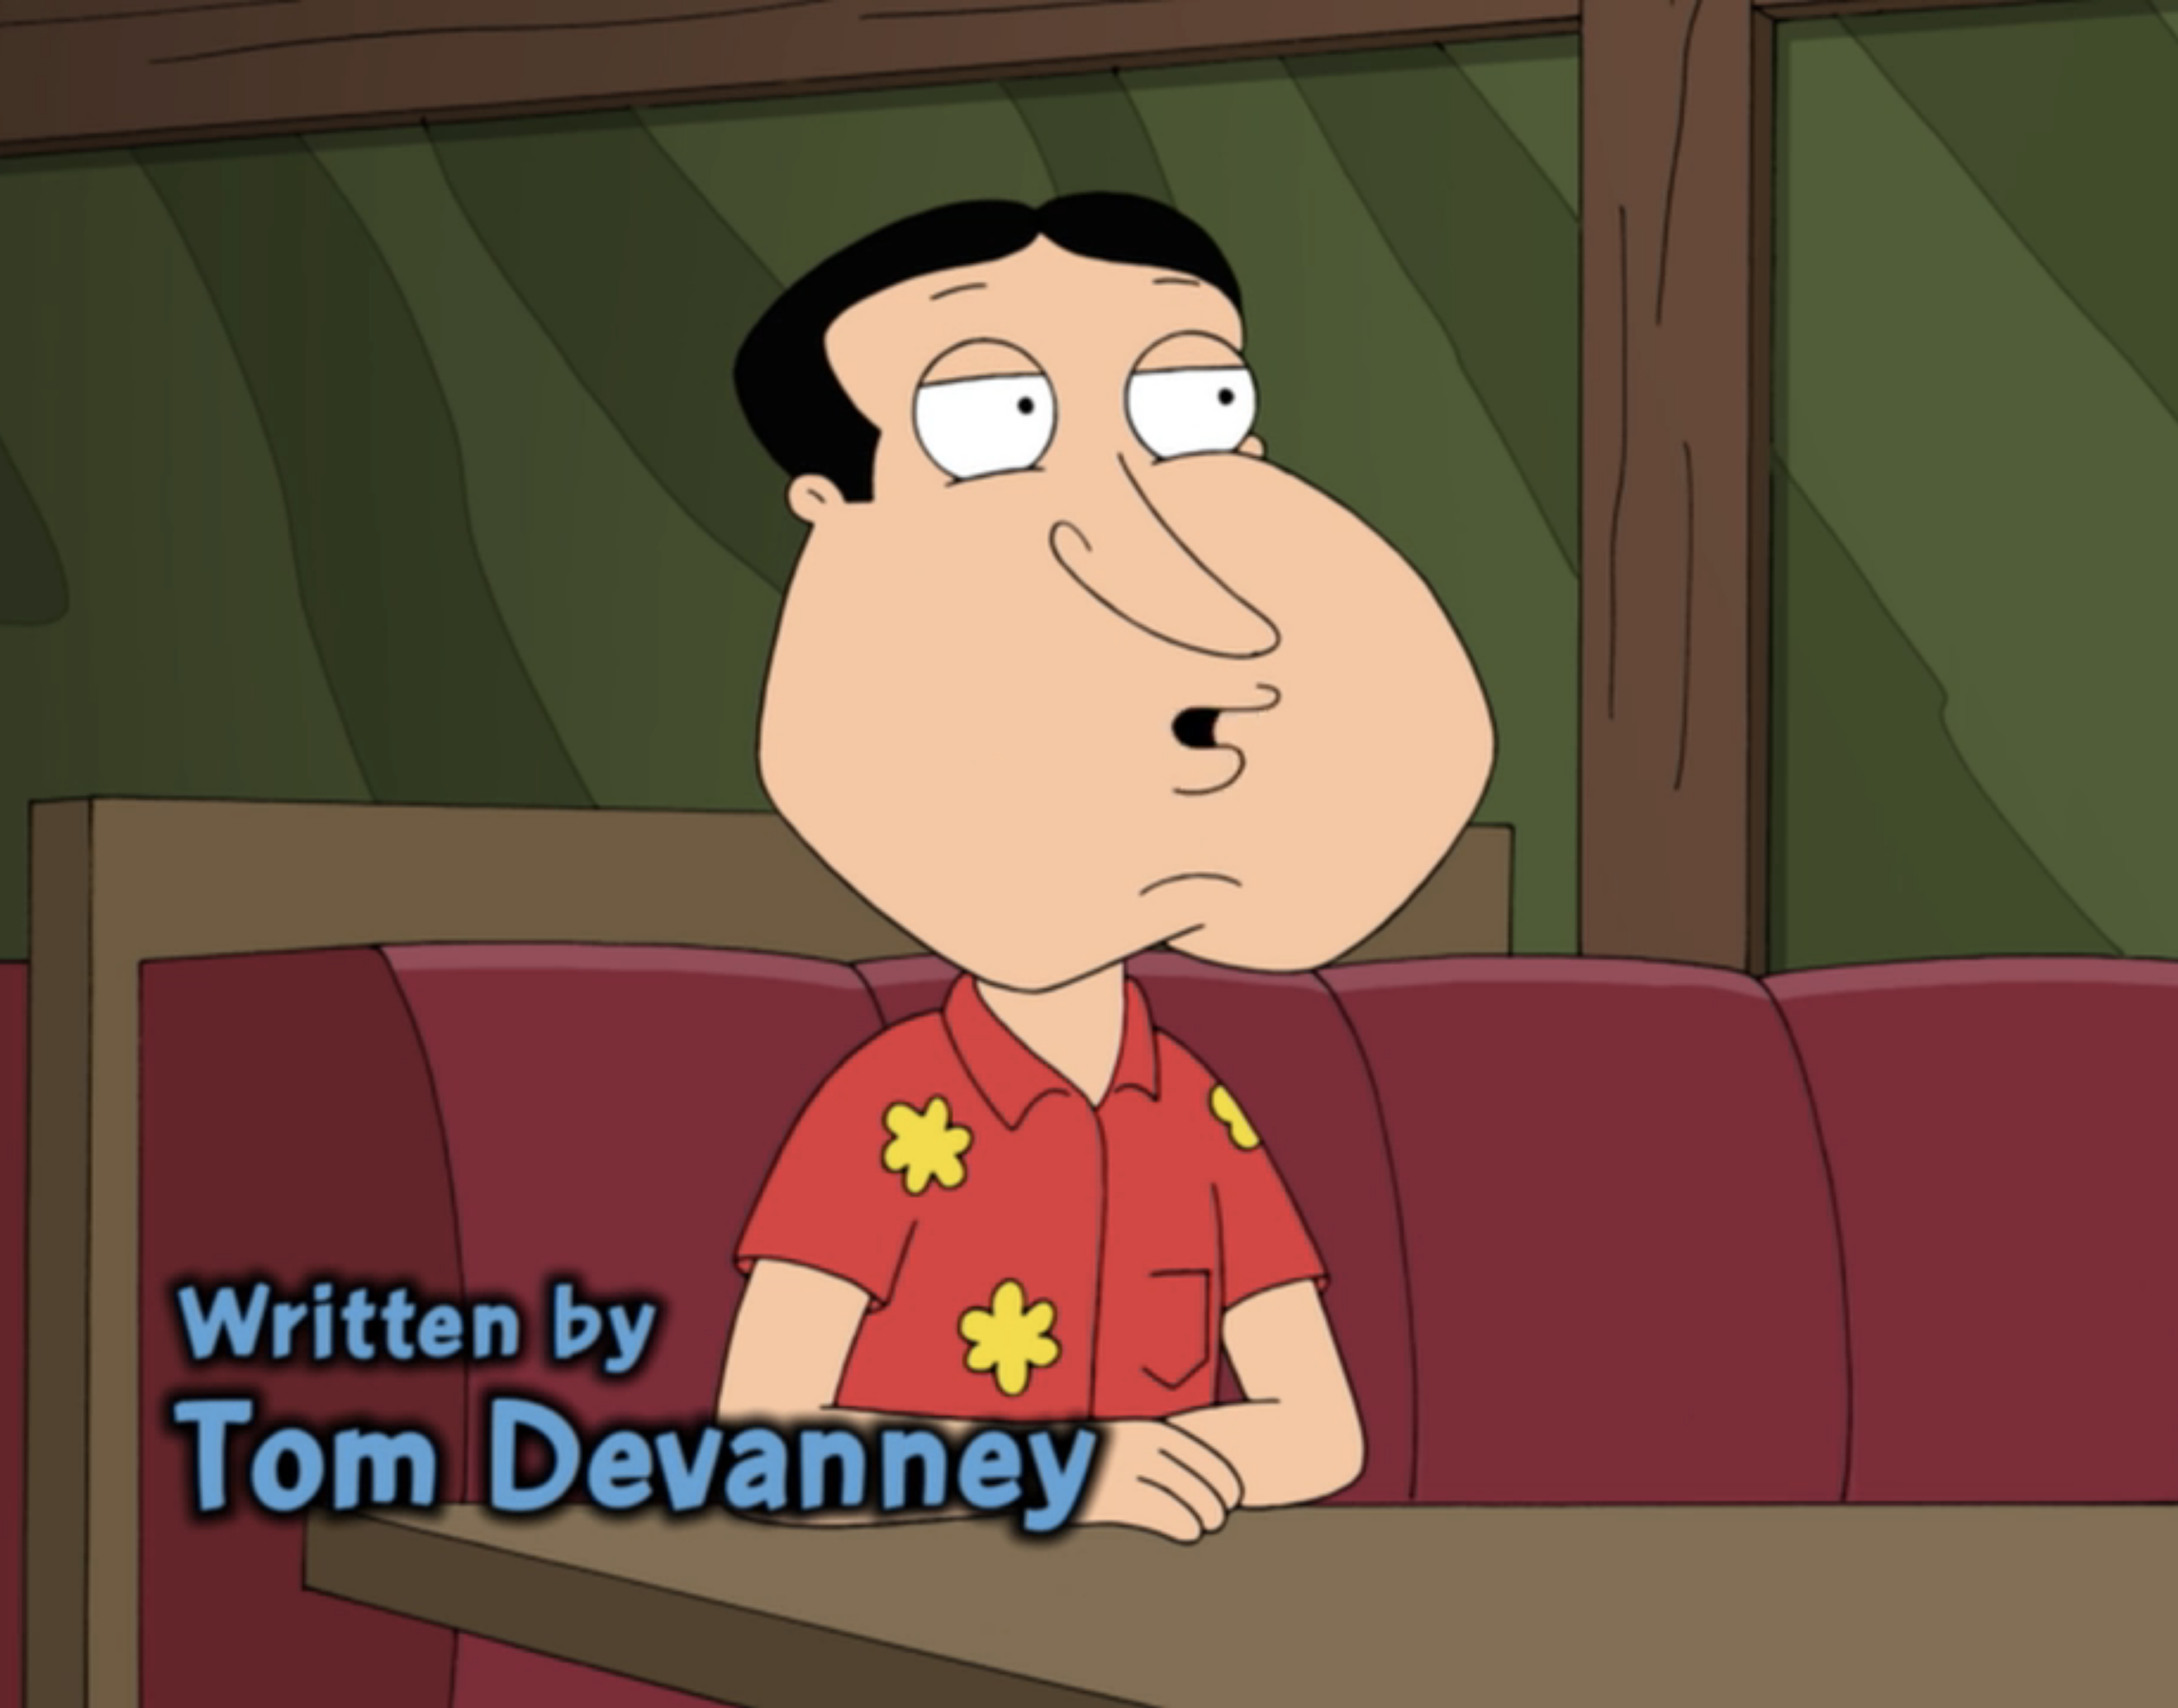 Credits showing Tom Devanney as the writer